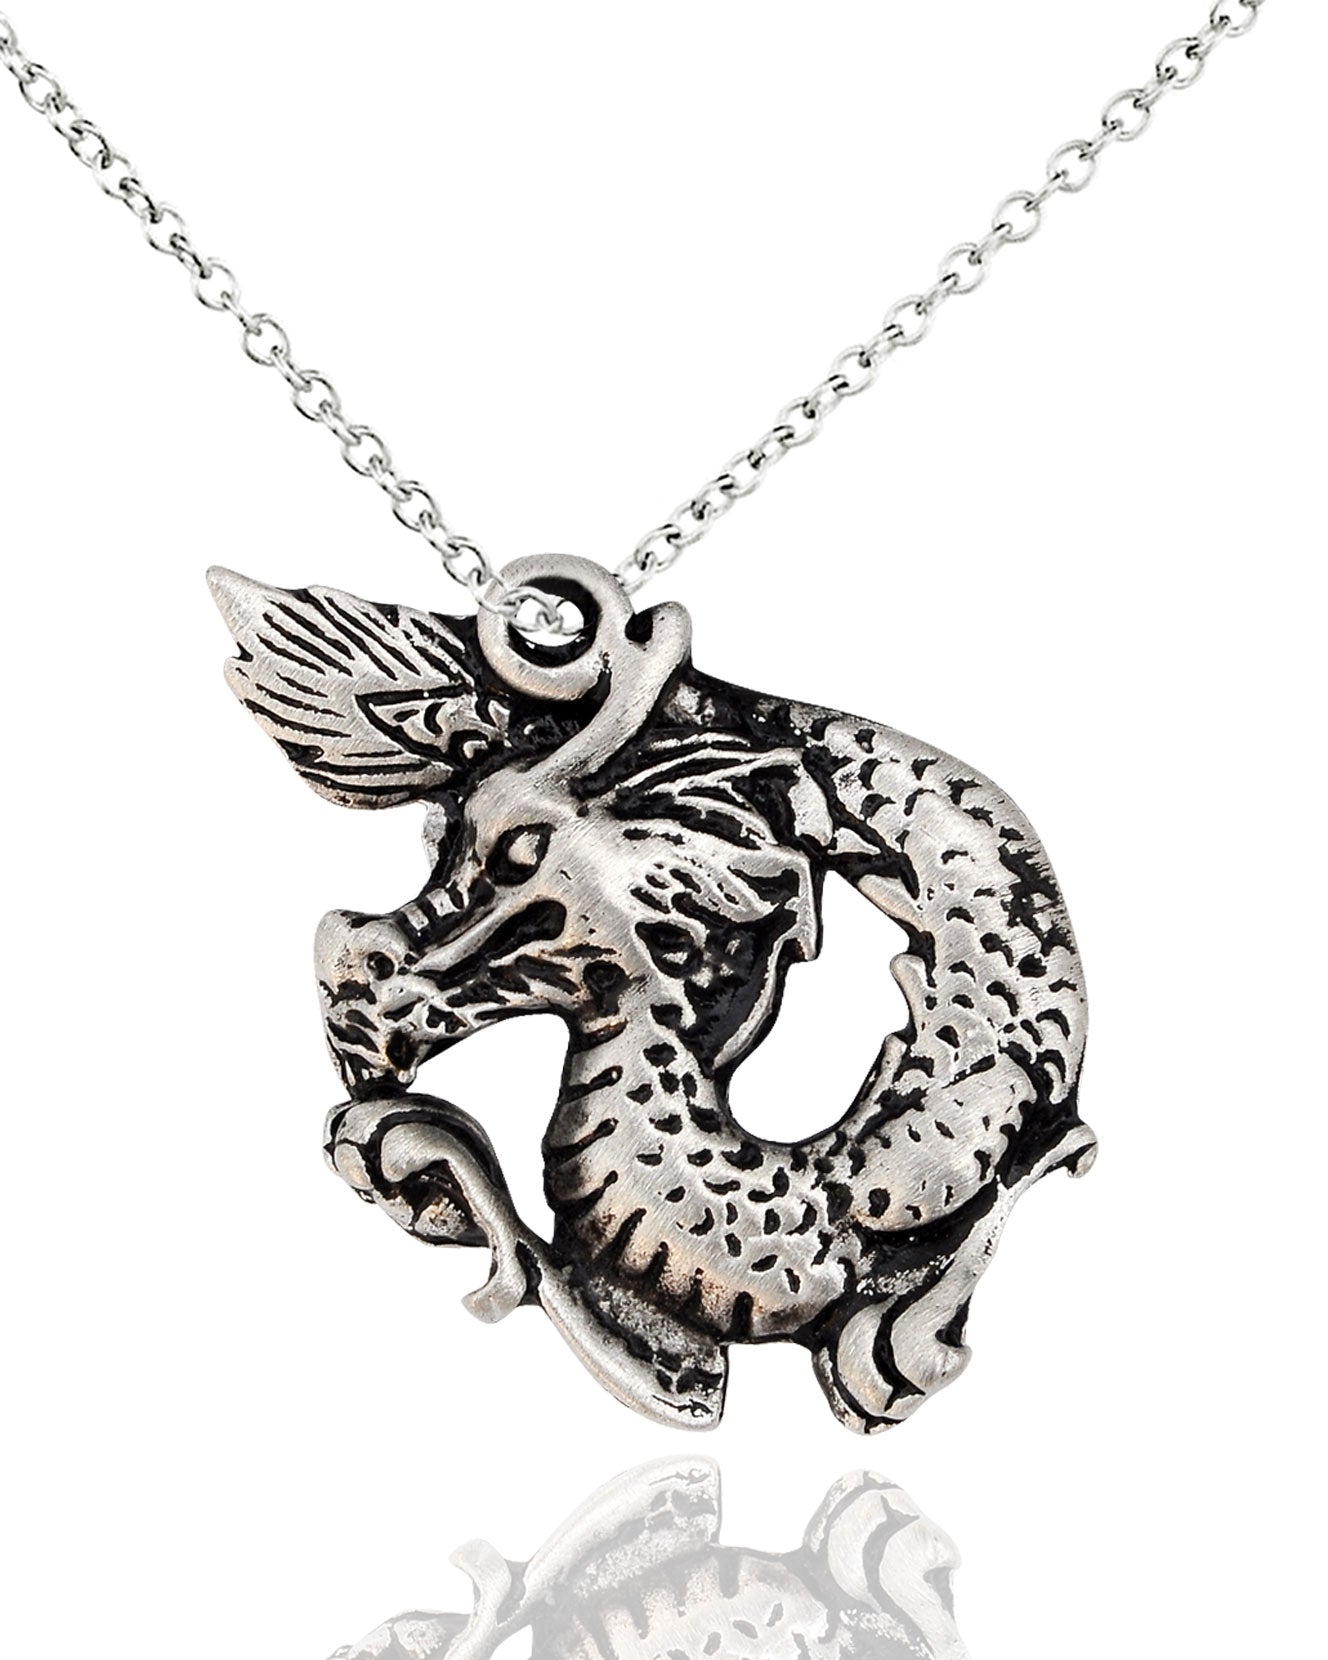 Cute Handmade Dragon Sword Silver Pewter Charm Necklace Pendant Jewelry